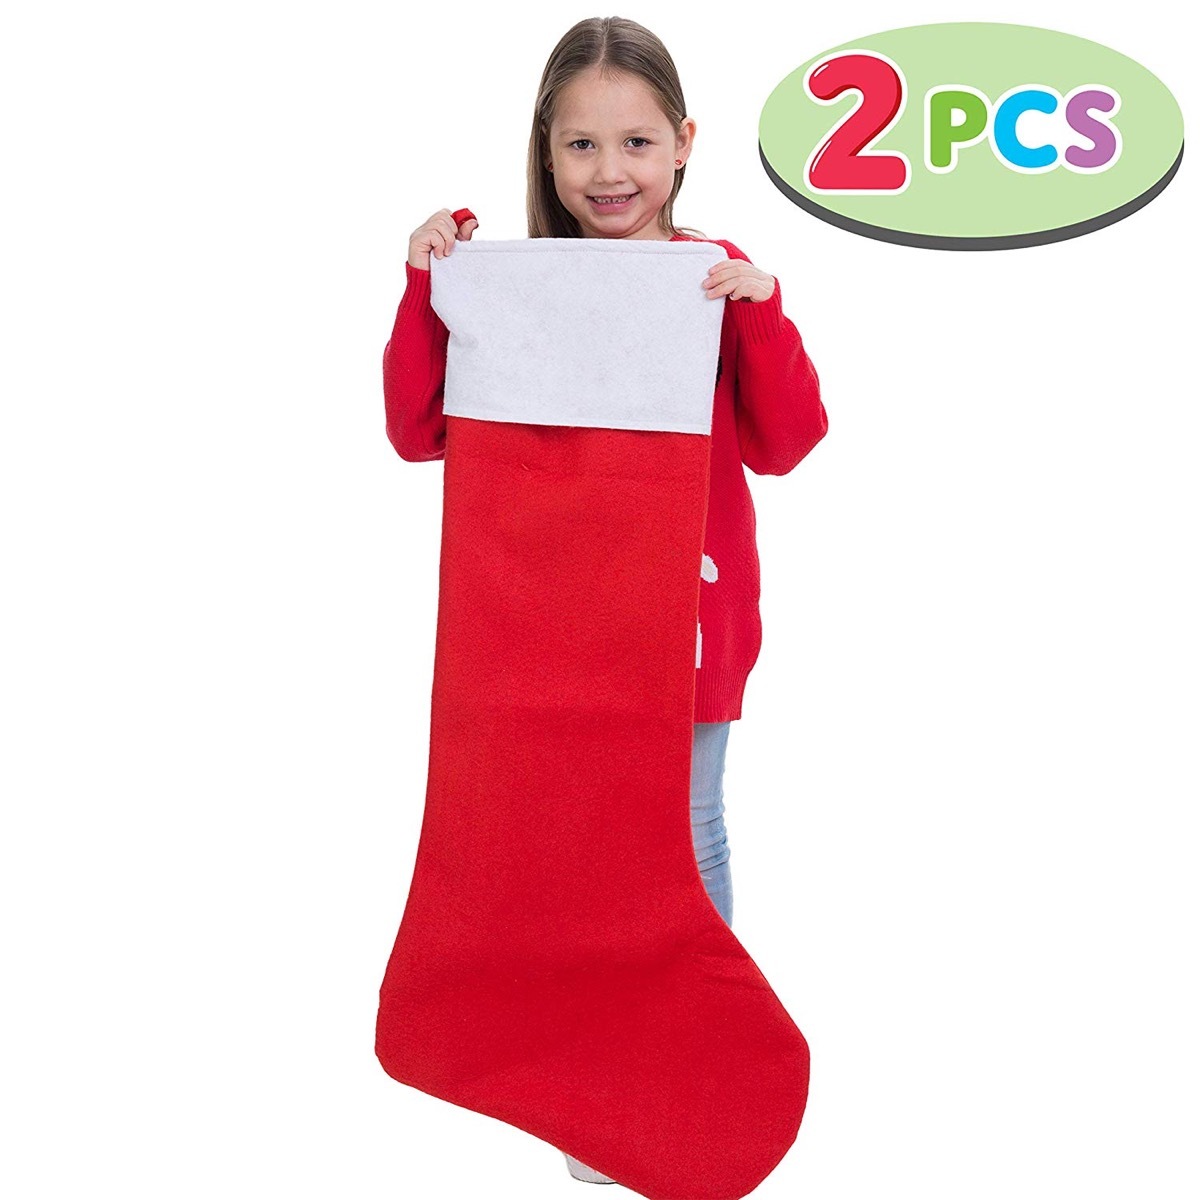 young girl holding up huge red and white stocking